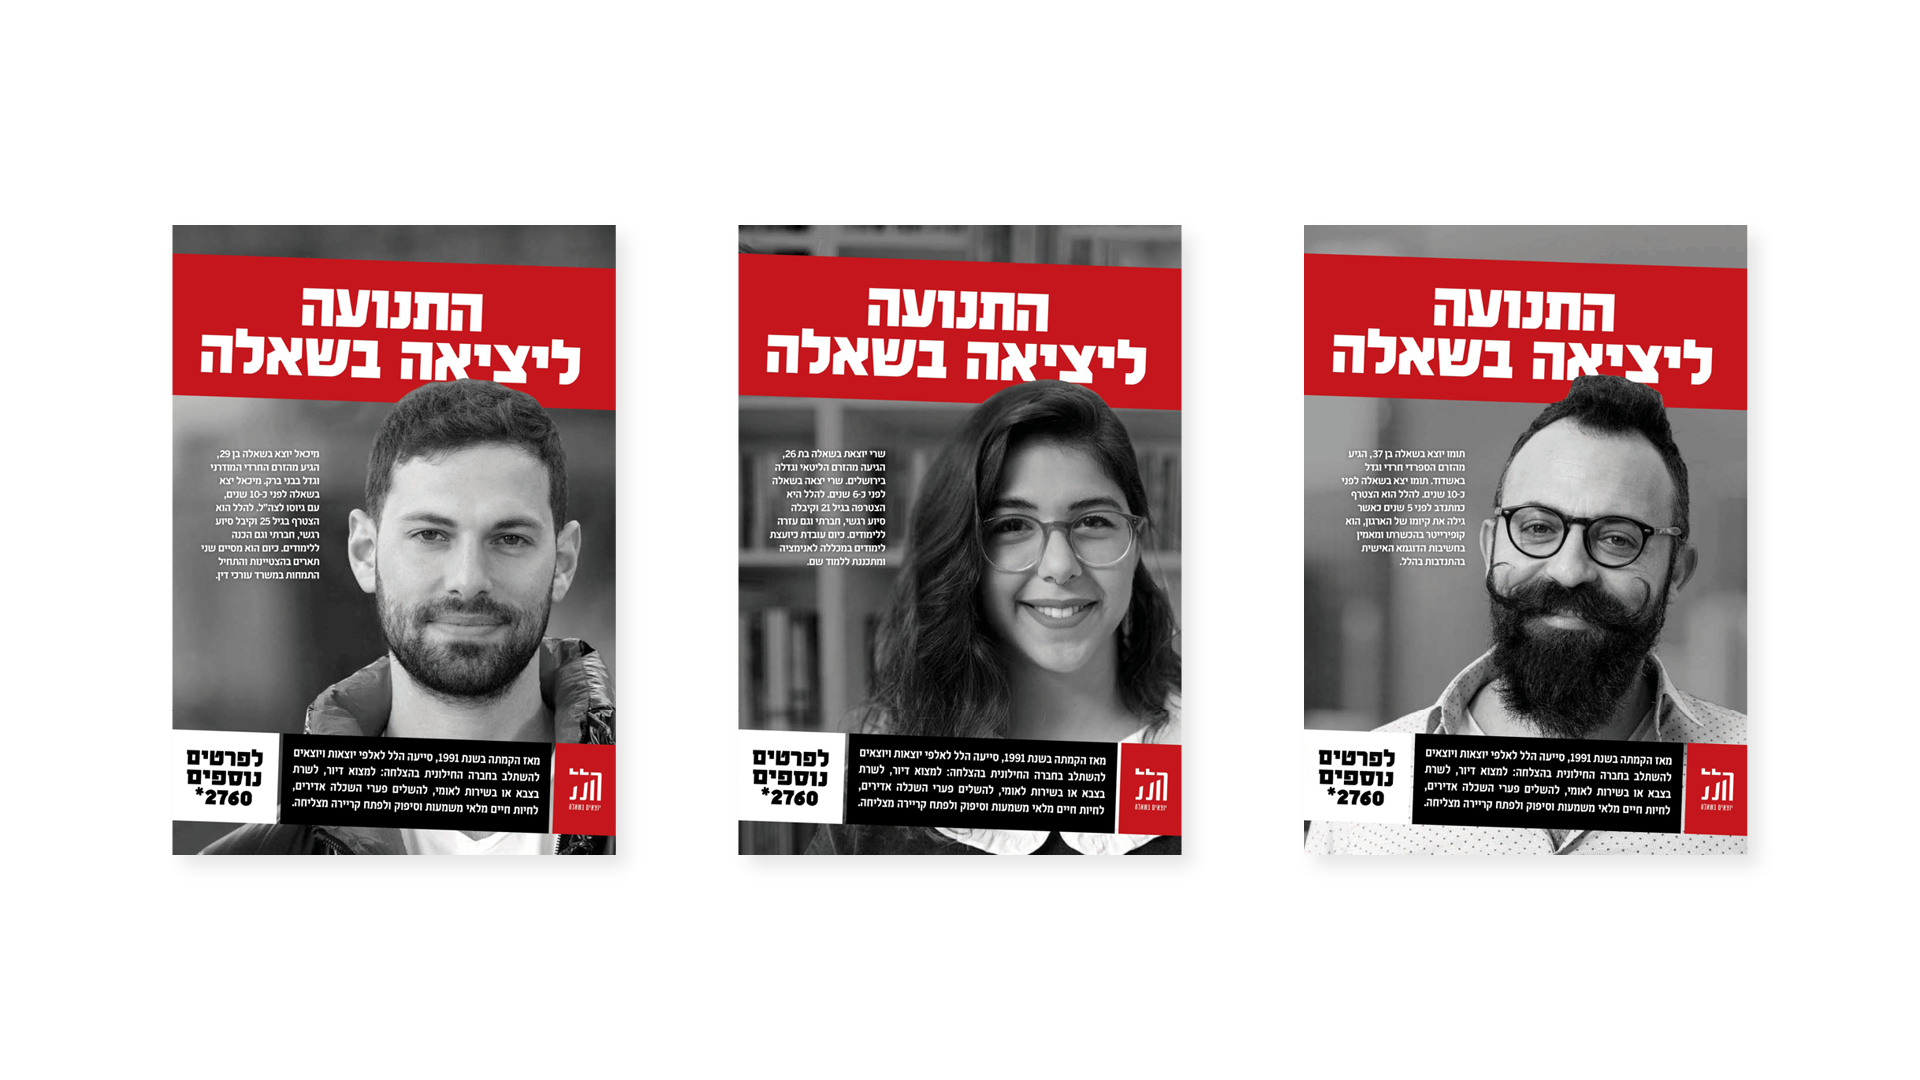 Hillel campaign poster series